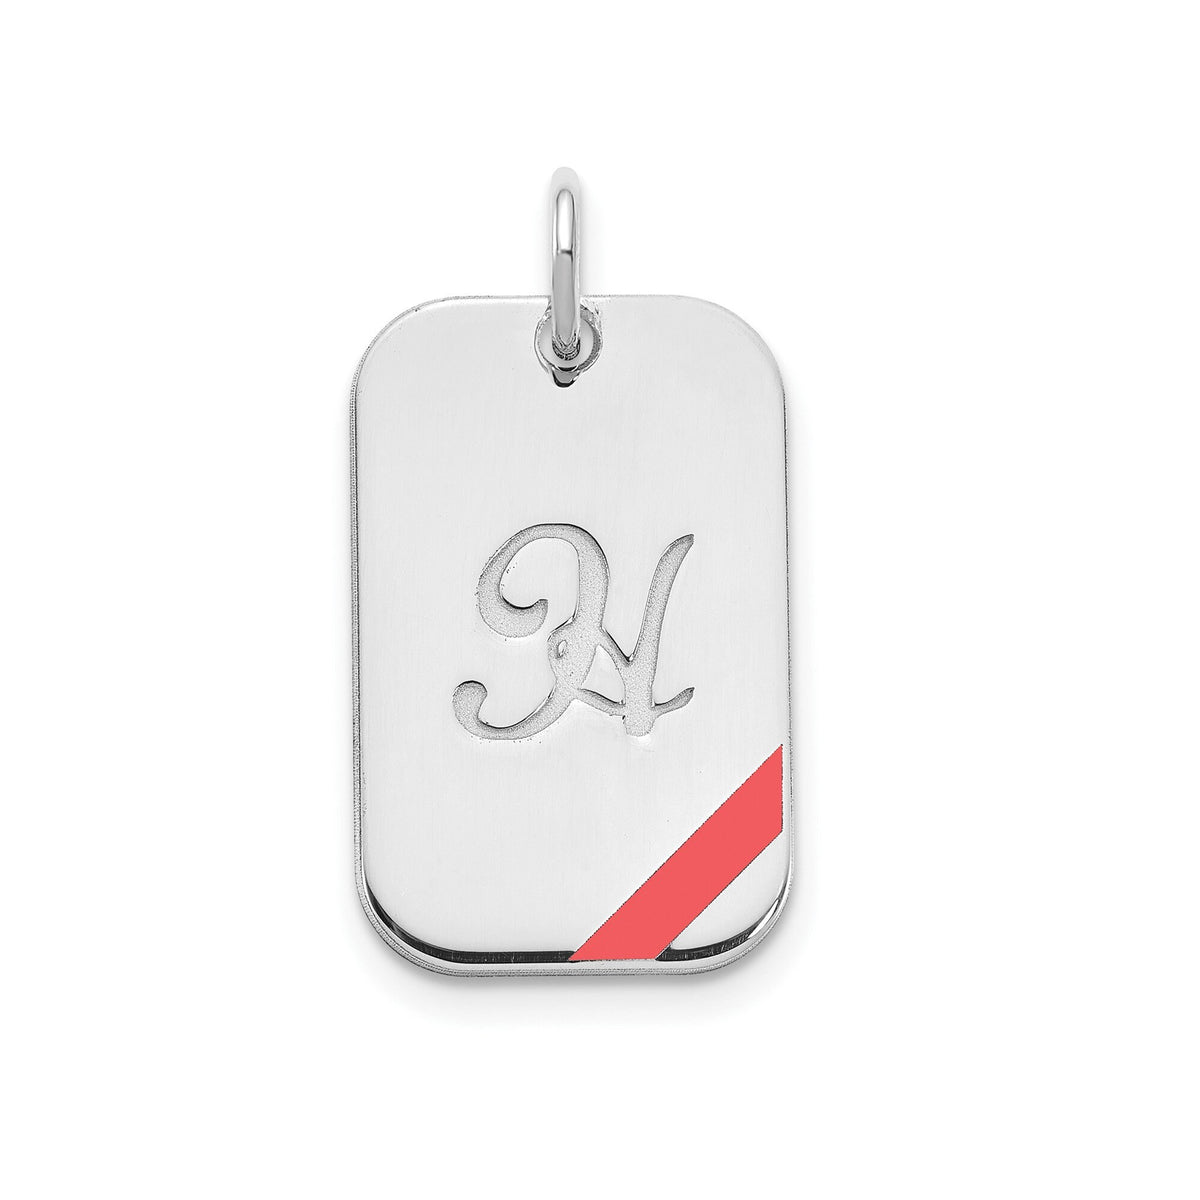 Personalized Initial Dog Tag with Epoxy Necklace (Multiple Colors Available) Gift Box Included